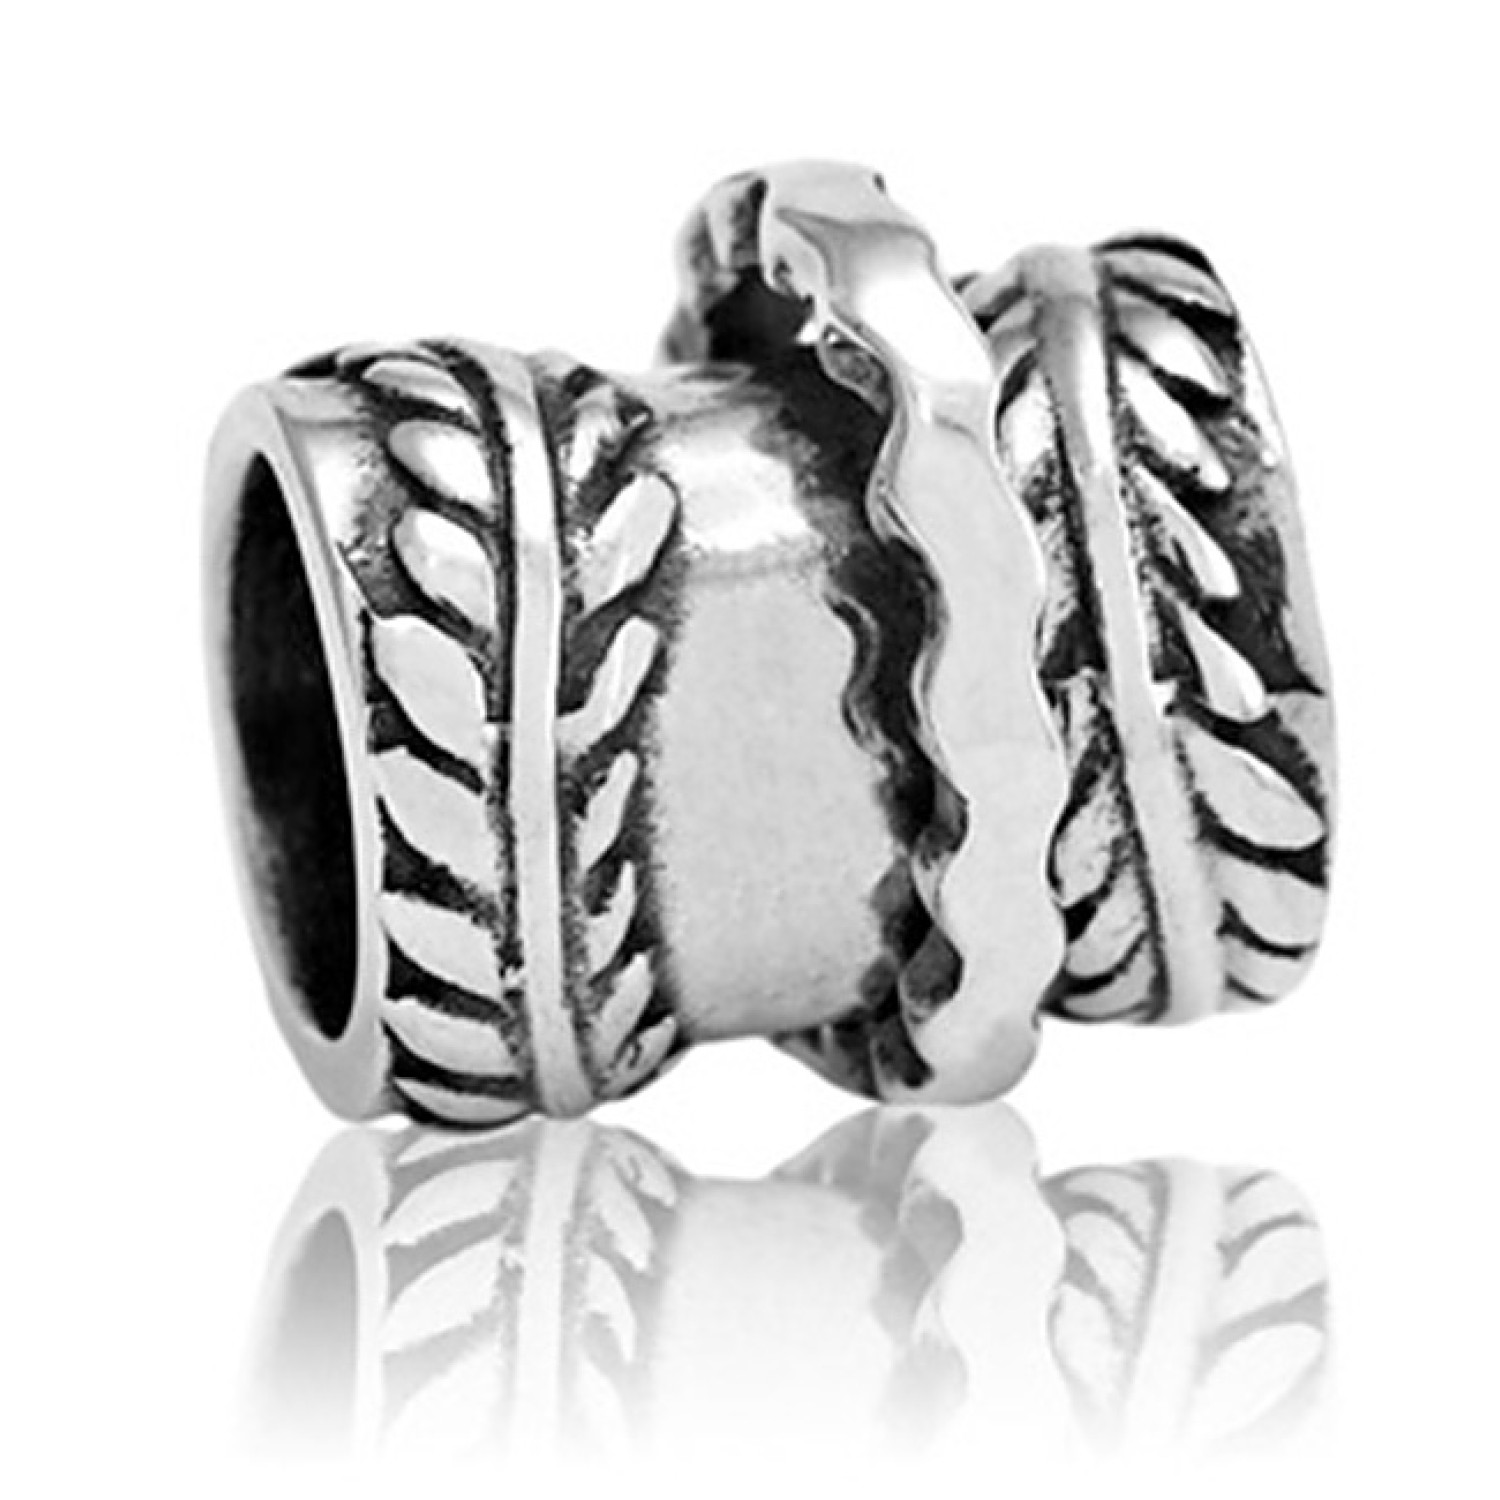 LKF015 Evolve Charm Trinity Fern. The silver fern is a proud symbol of New Zealand. Embodied in this striking emblem is a unique sense of belonging. It is a badge of honour to identify the wearer’s pride as a Kiwi, special affinity with New Zealand @chris